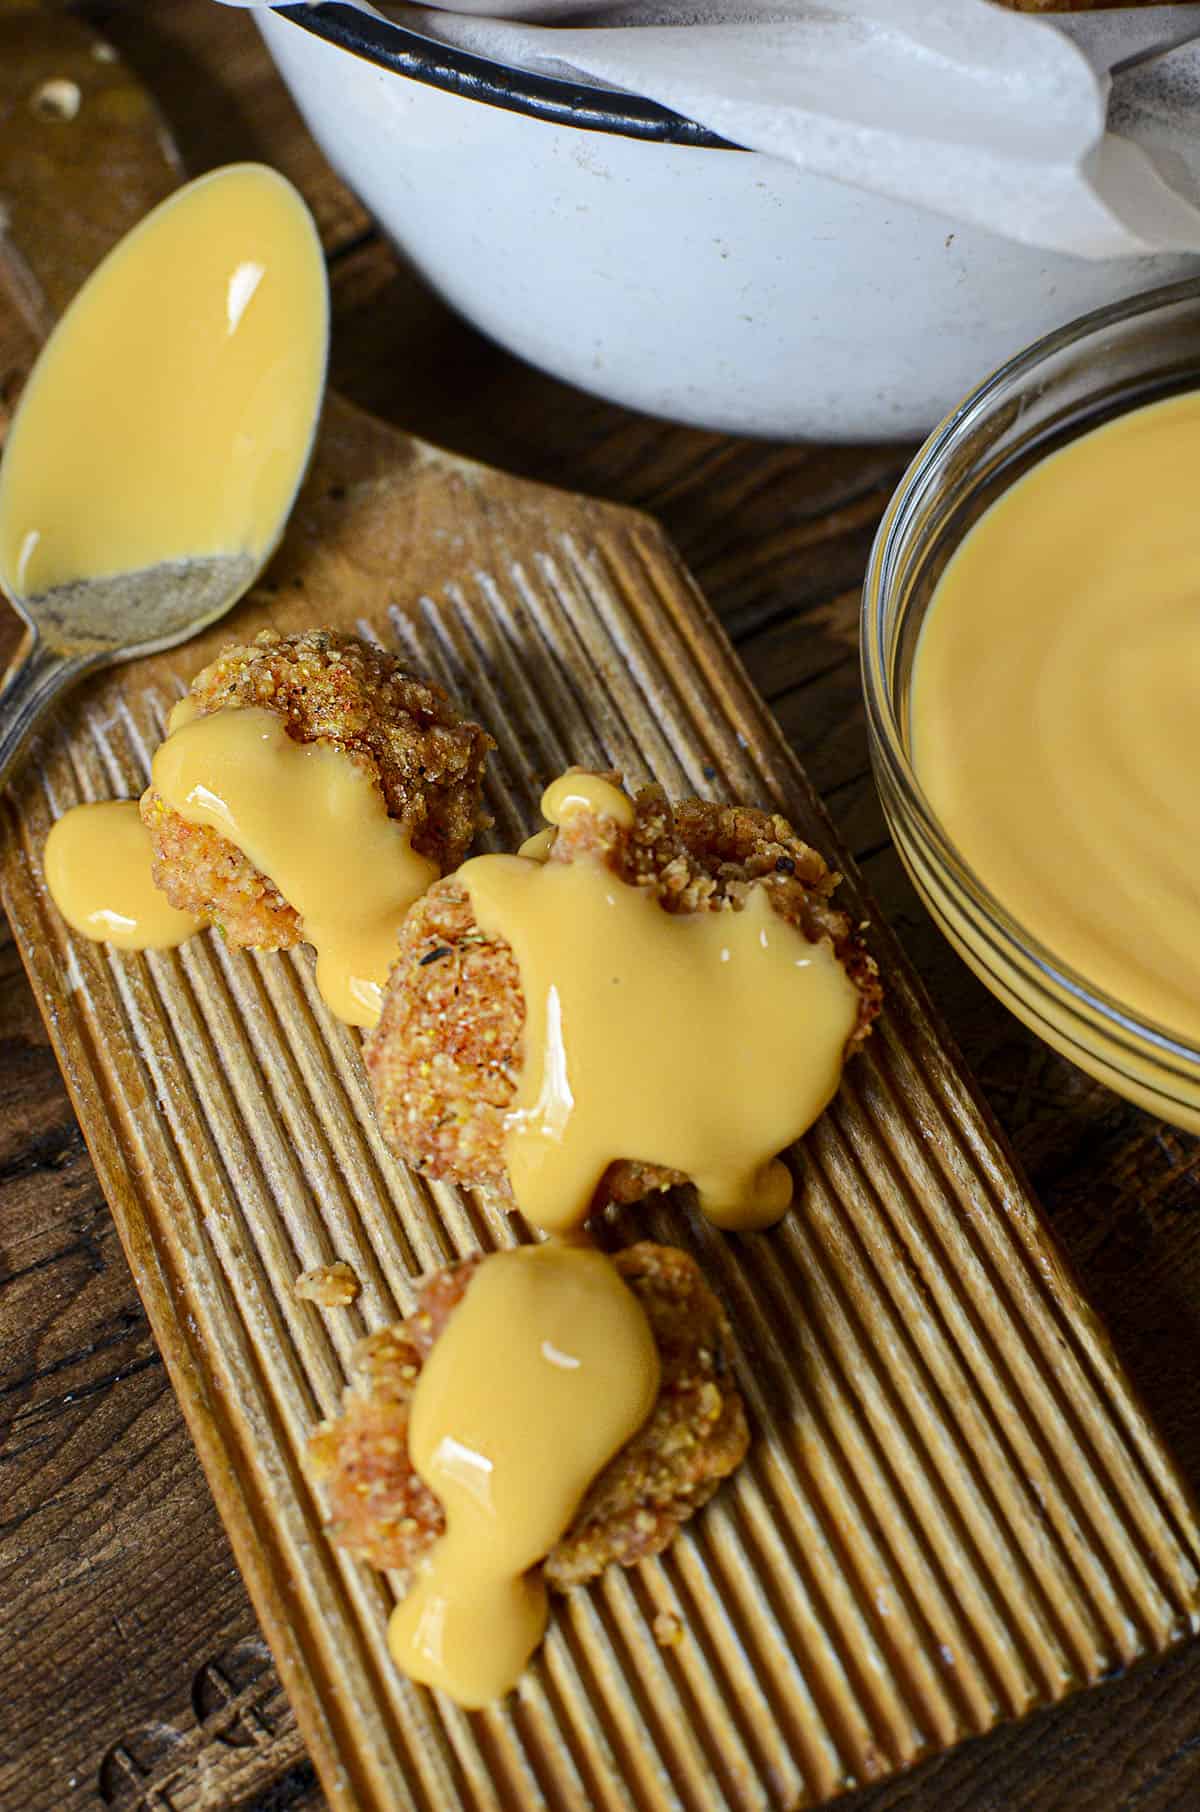 Popcorn bites on a wooden board with nacho cheese drizzled over top.